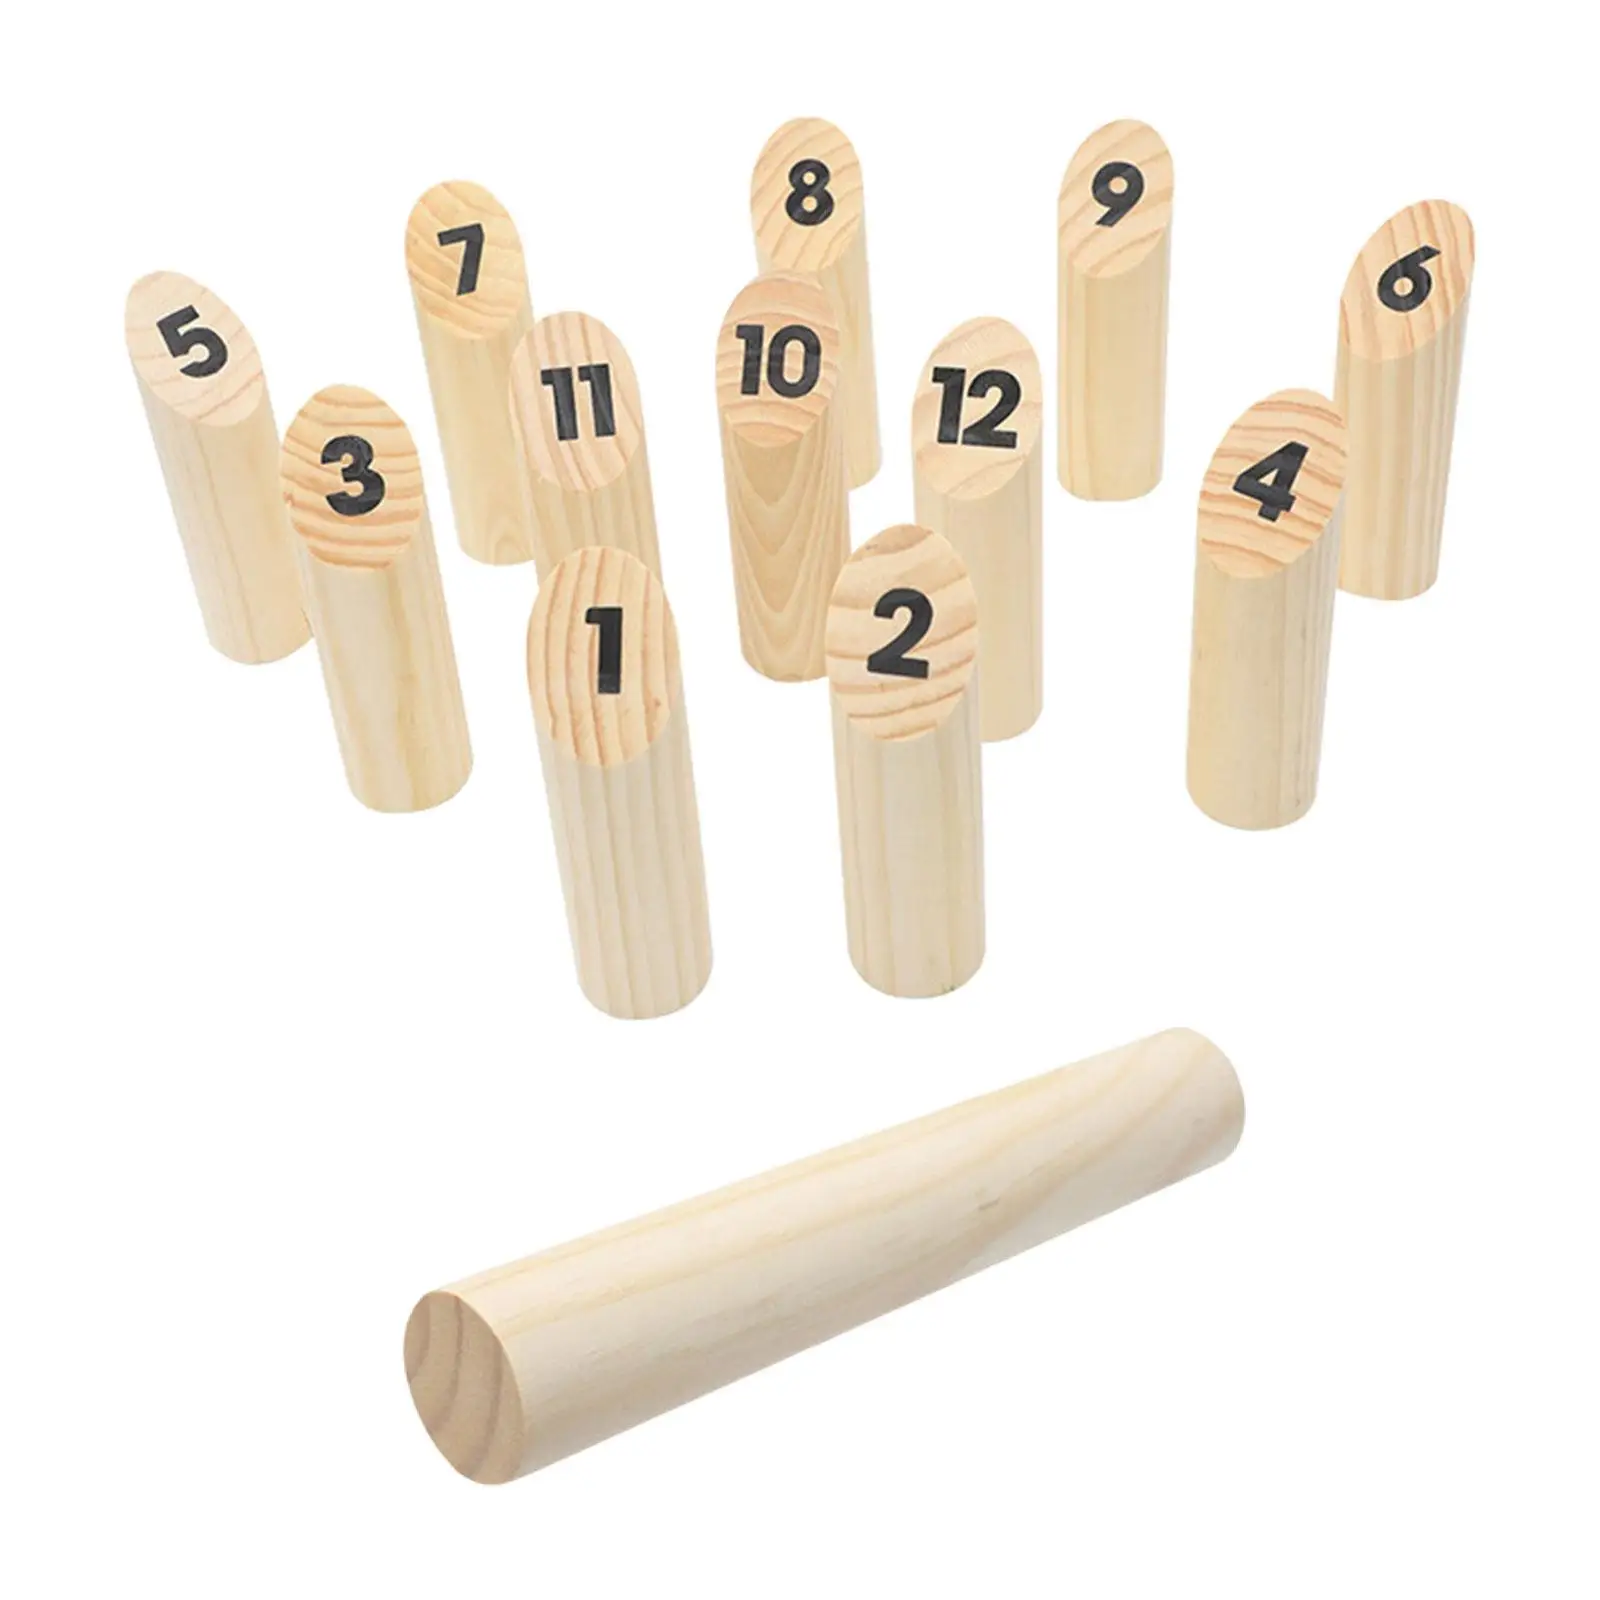 Wooden numbered block Toss Game Set Yard Game for Outdoor Lawn Picnic Backyard Garden